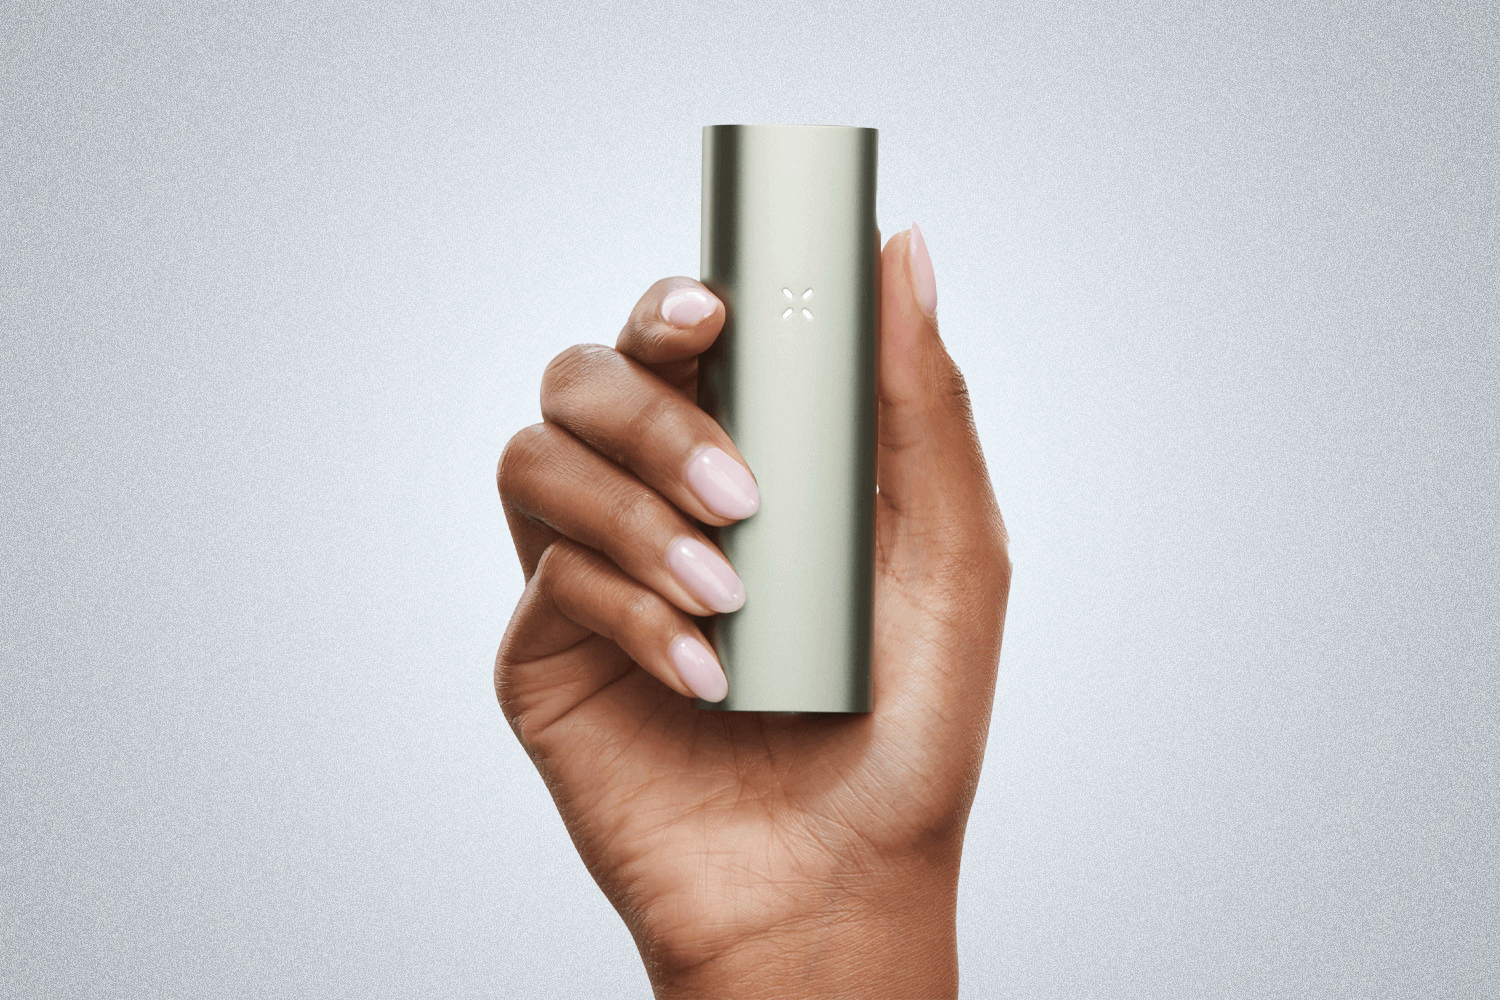 The Pax 3's portable design is perfect for toking on the go